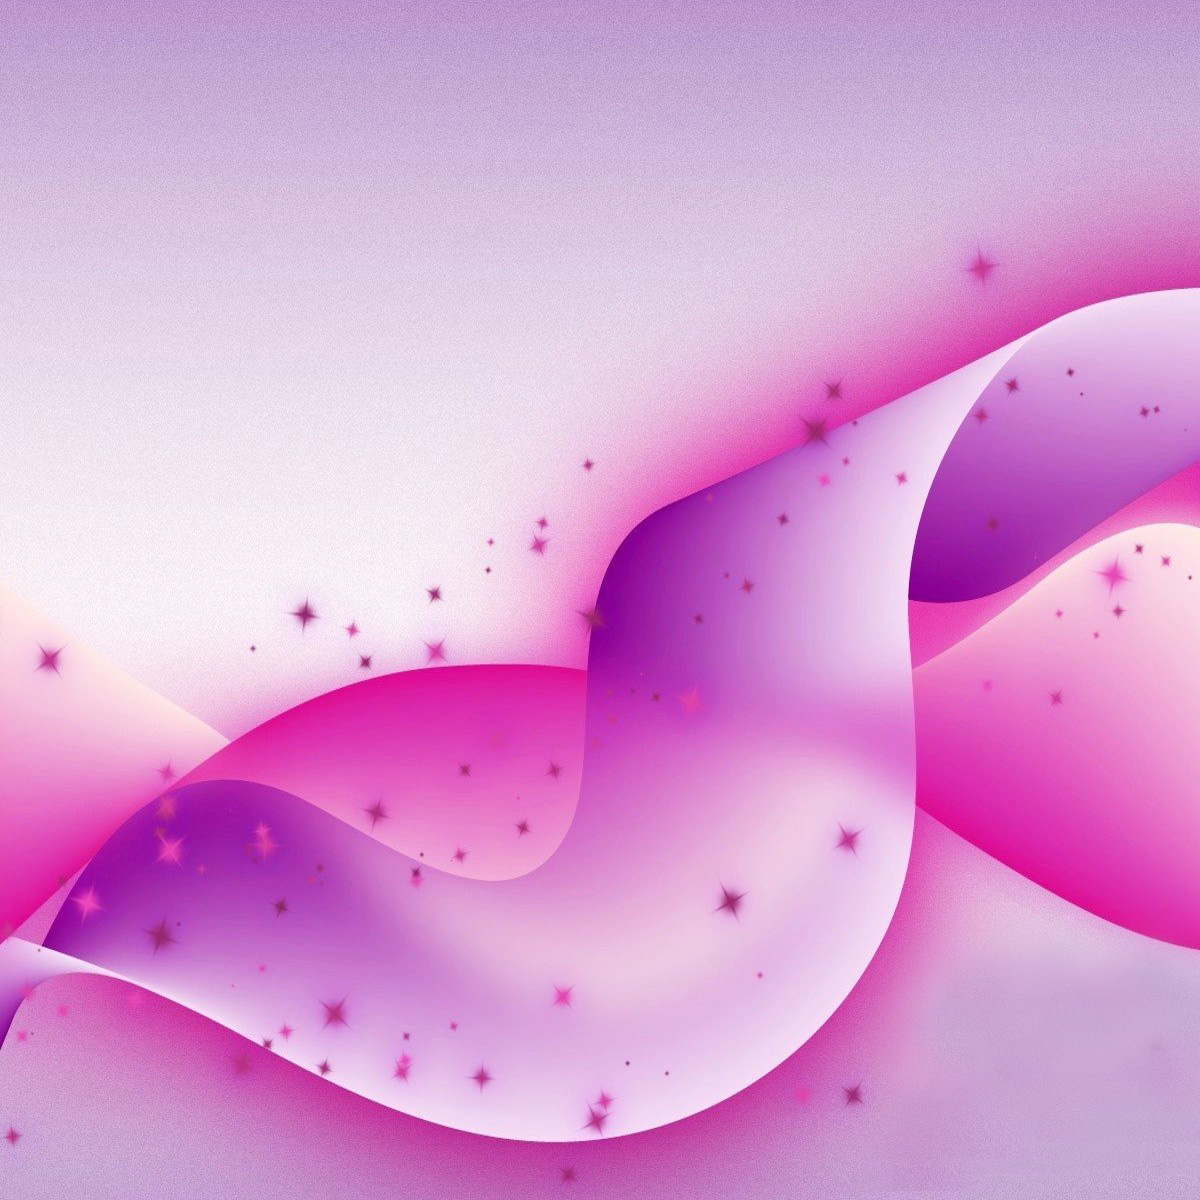 Home Abstract Pink Girly Background